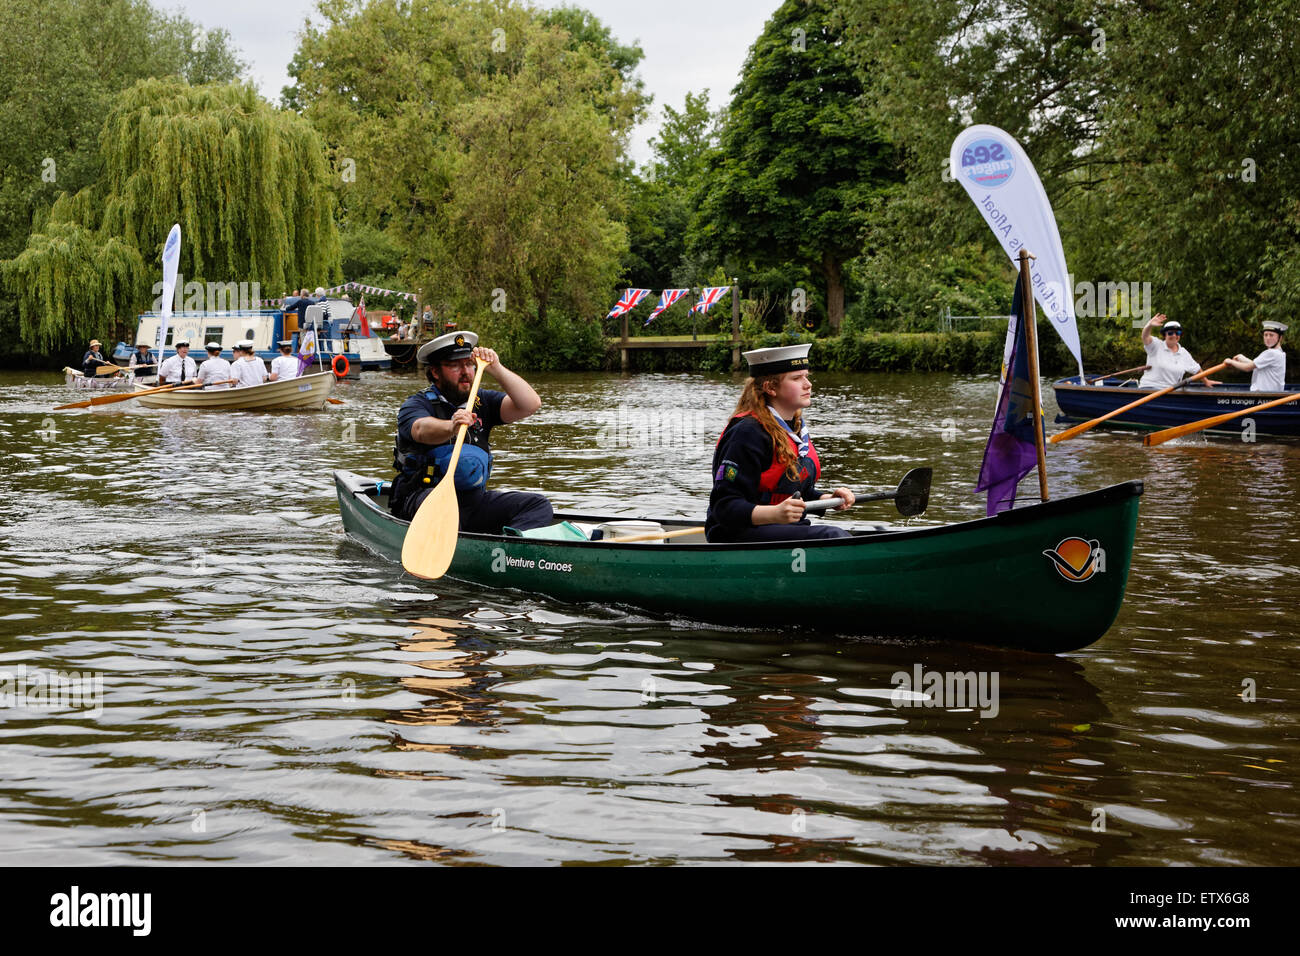 On the River Thames at Runnymede uniformed sea scouts, man and young woman, paddle a canoe downstream Stock Photo